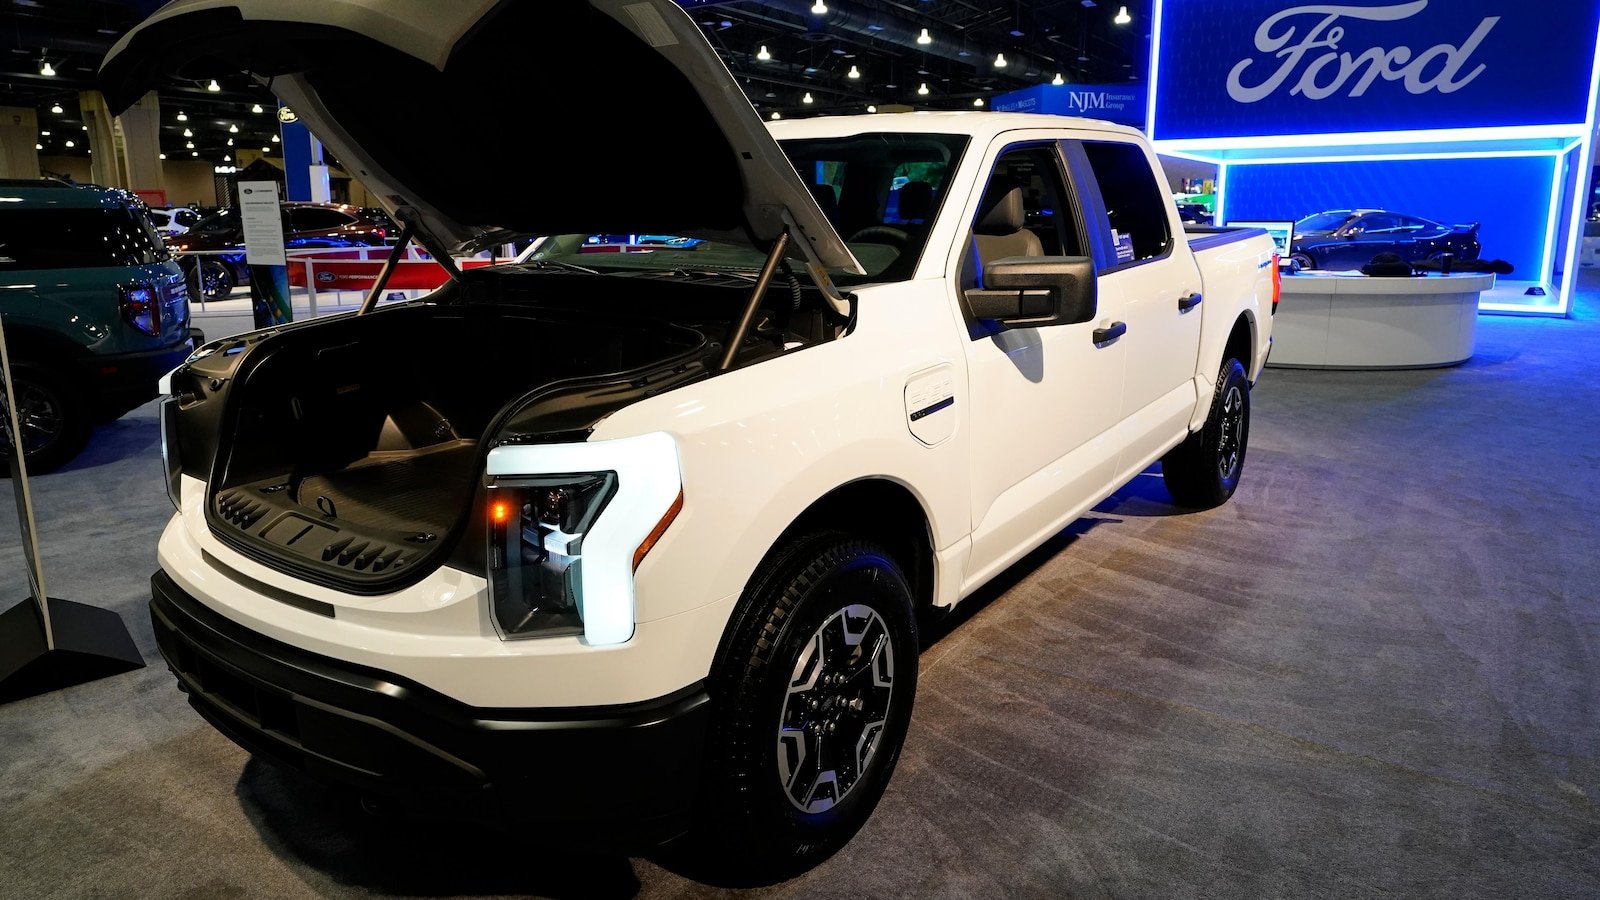 Ford To Delay Production Of New Electric Pickup And Large SUV As US EV Sales Growth Slows